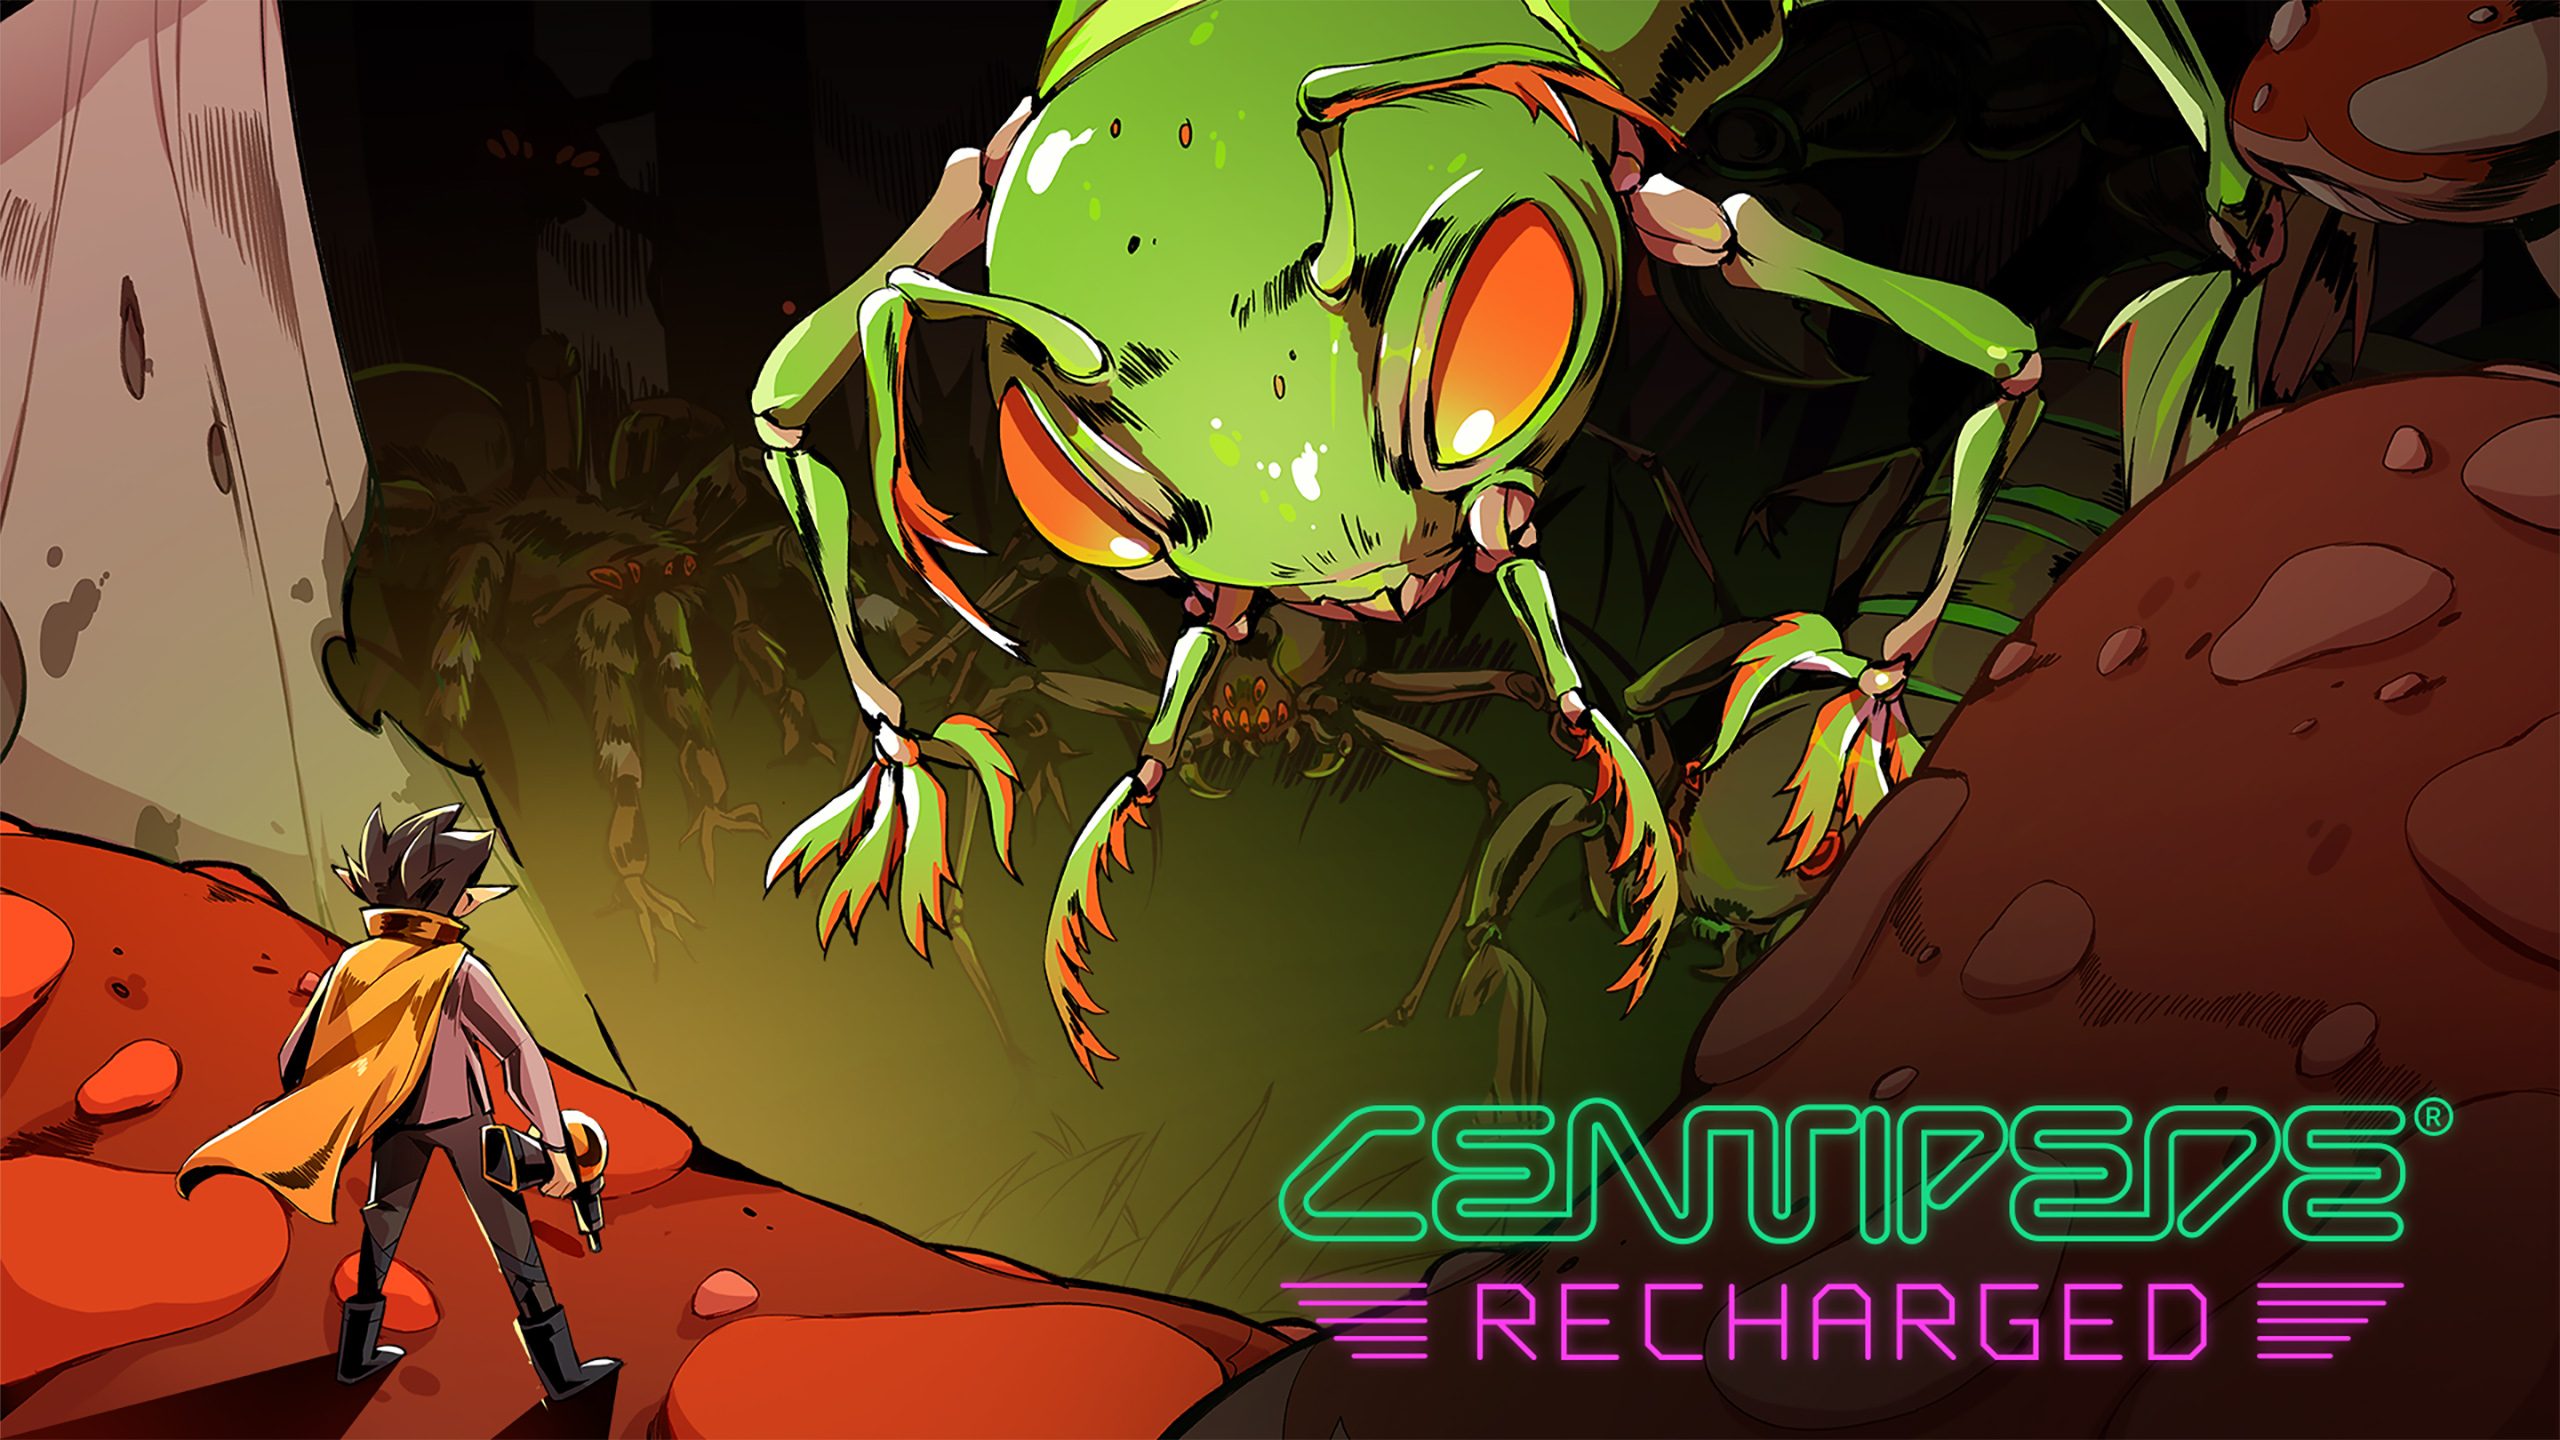 centipede-recharged-08-31-21-1-7873280